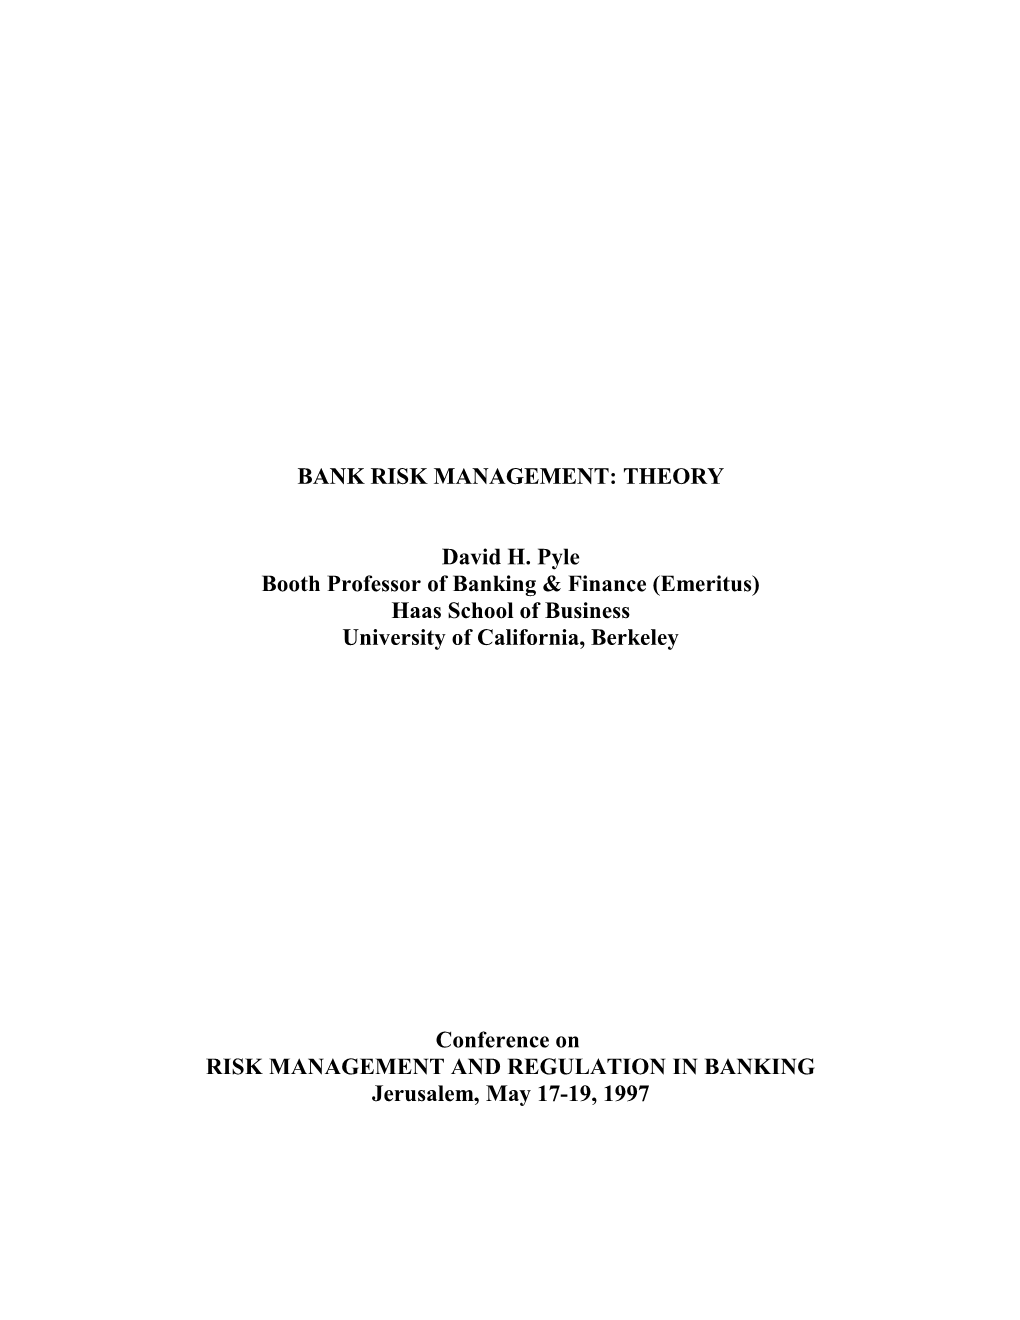 Bank Risk Management: Theory